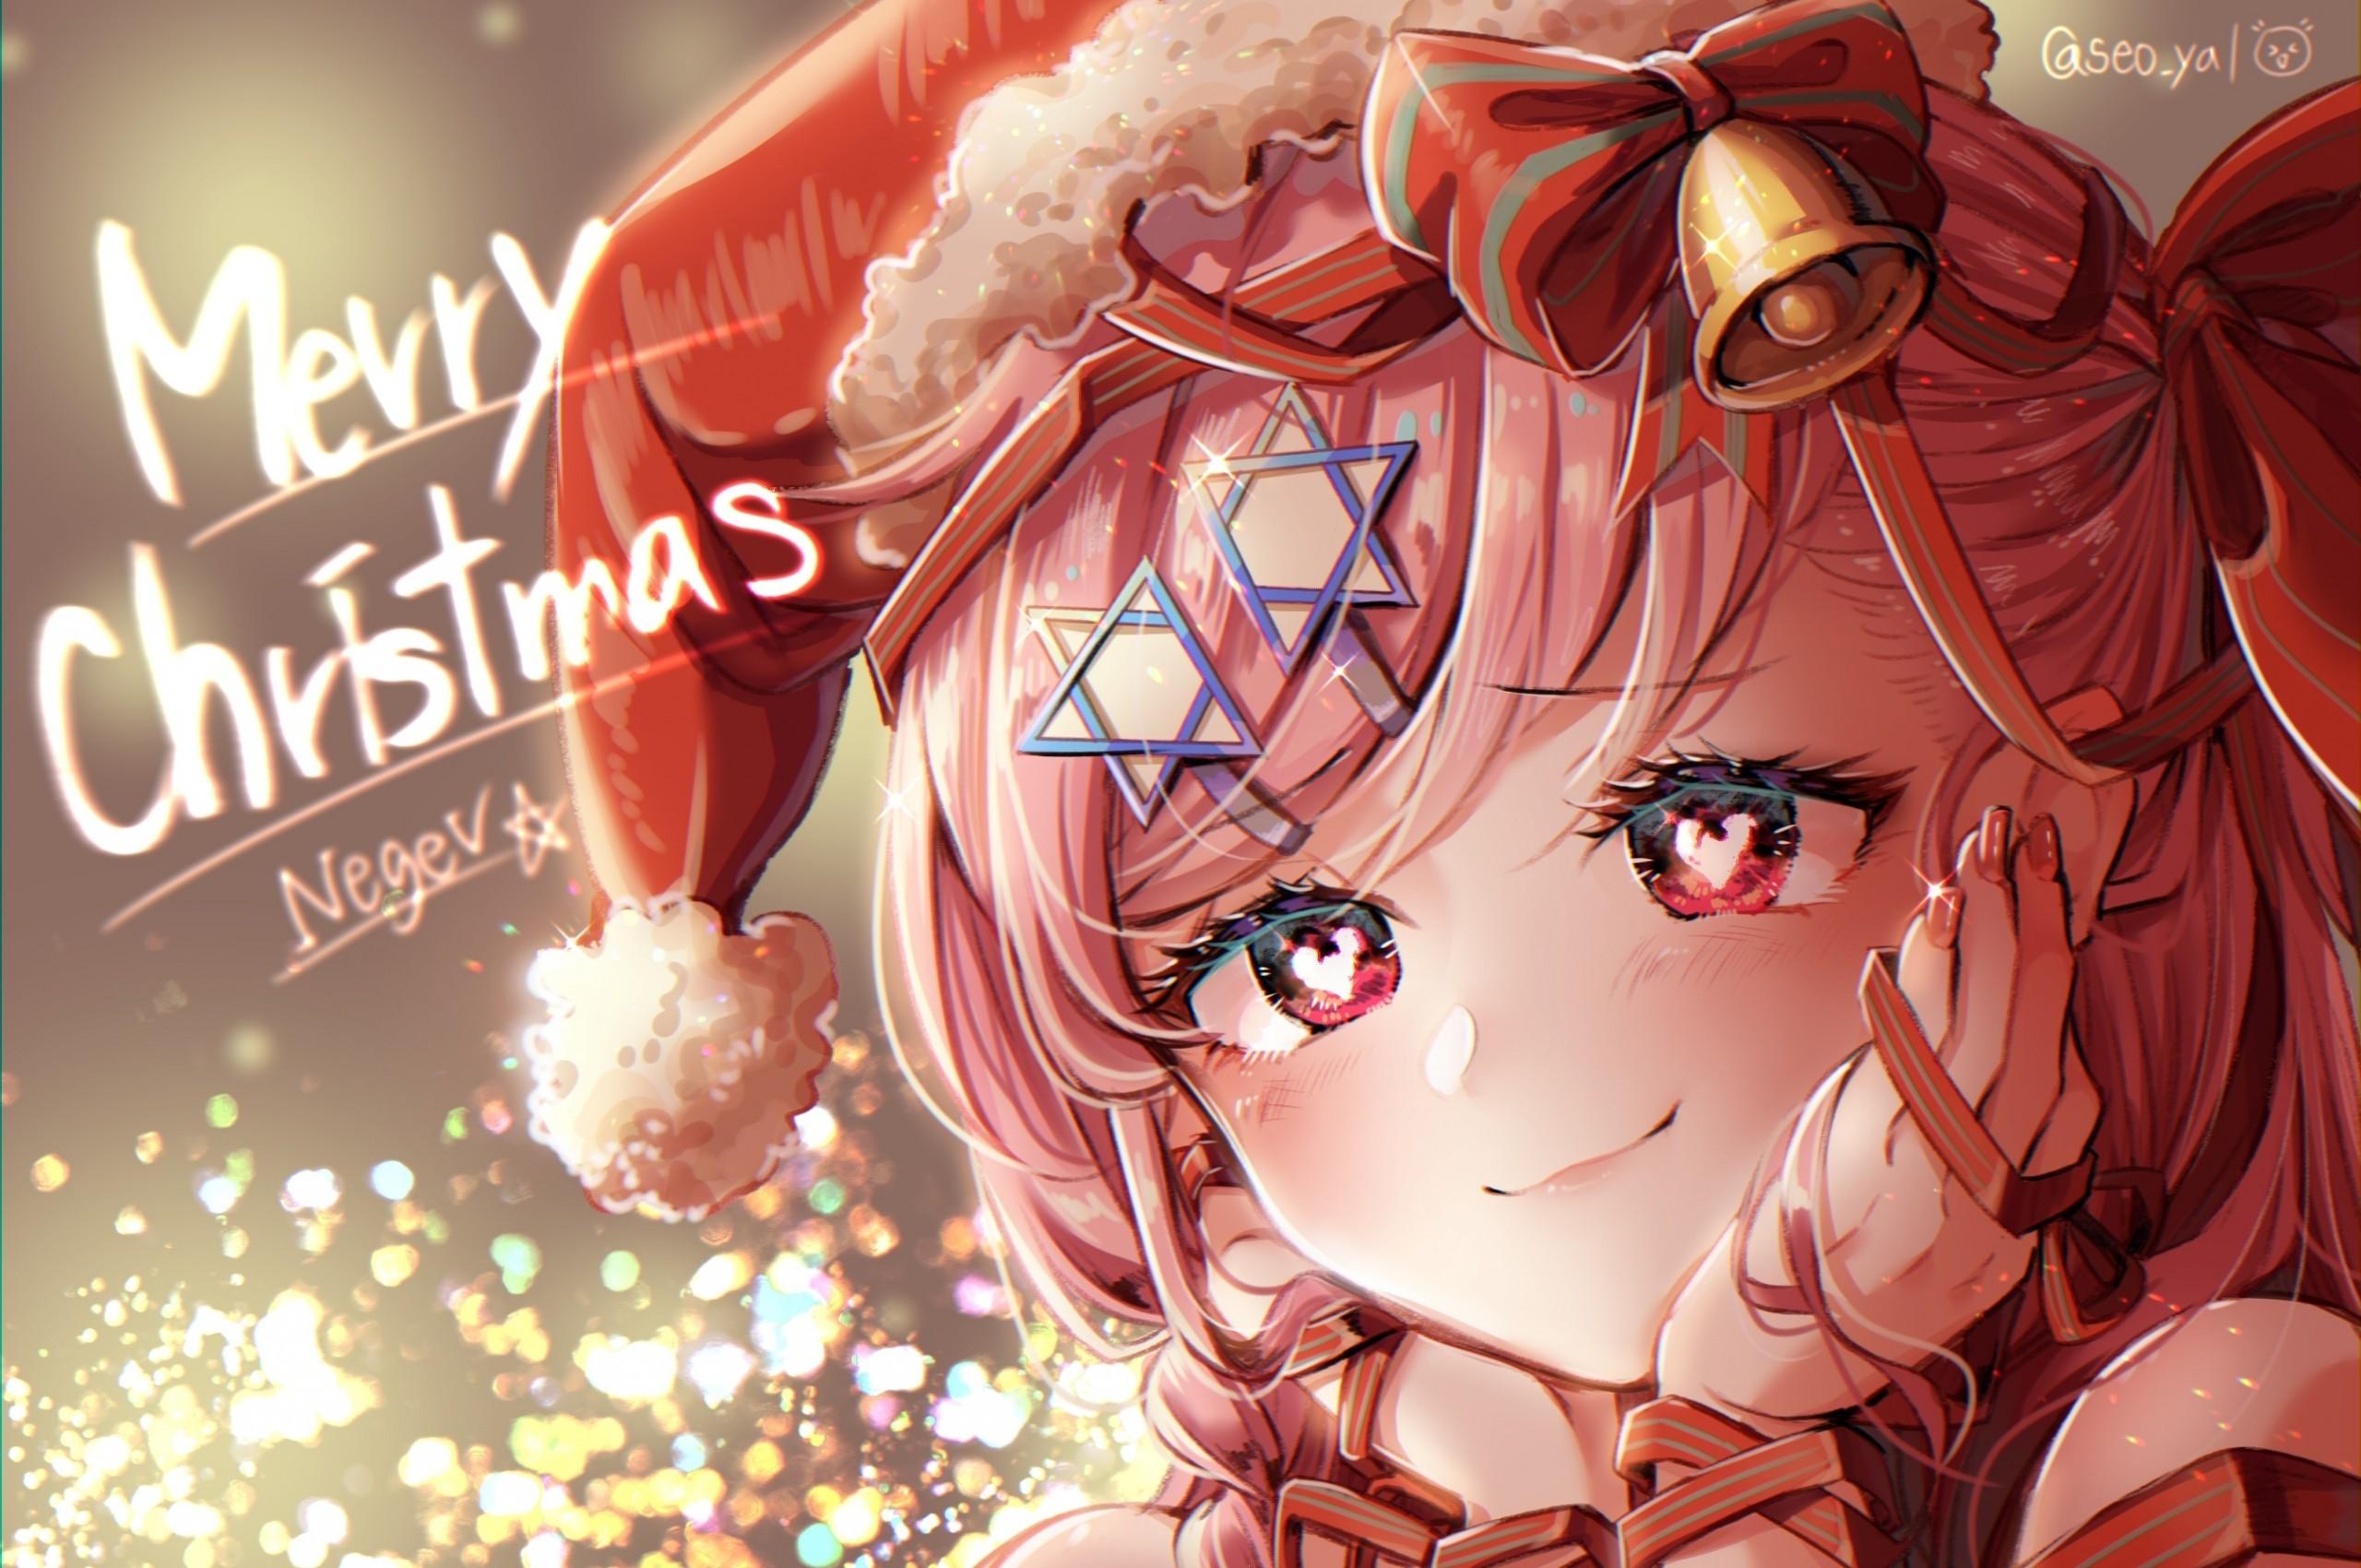 Anime Merry Christmas 2020 Wallpapers - Wallpaper Cave